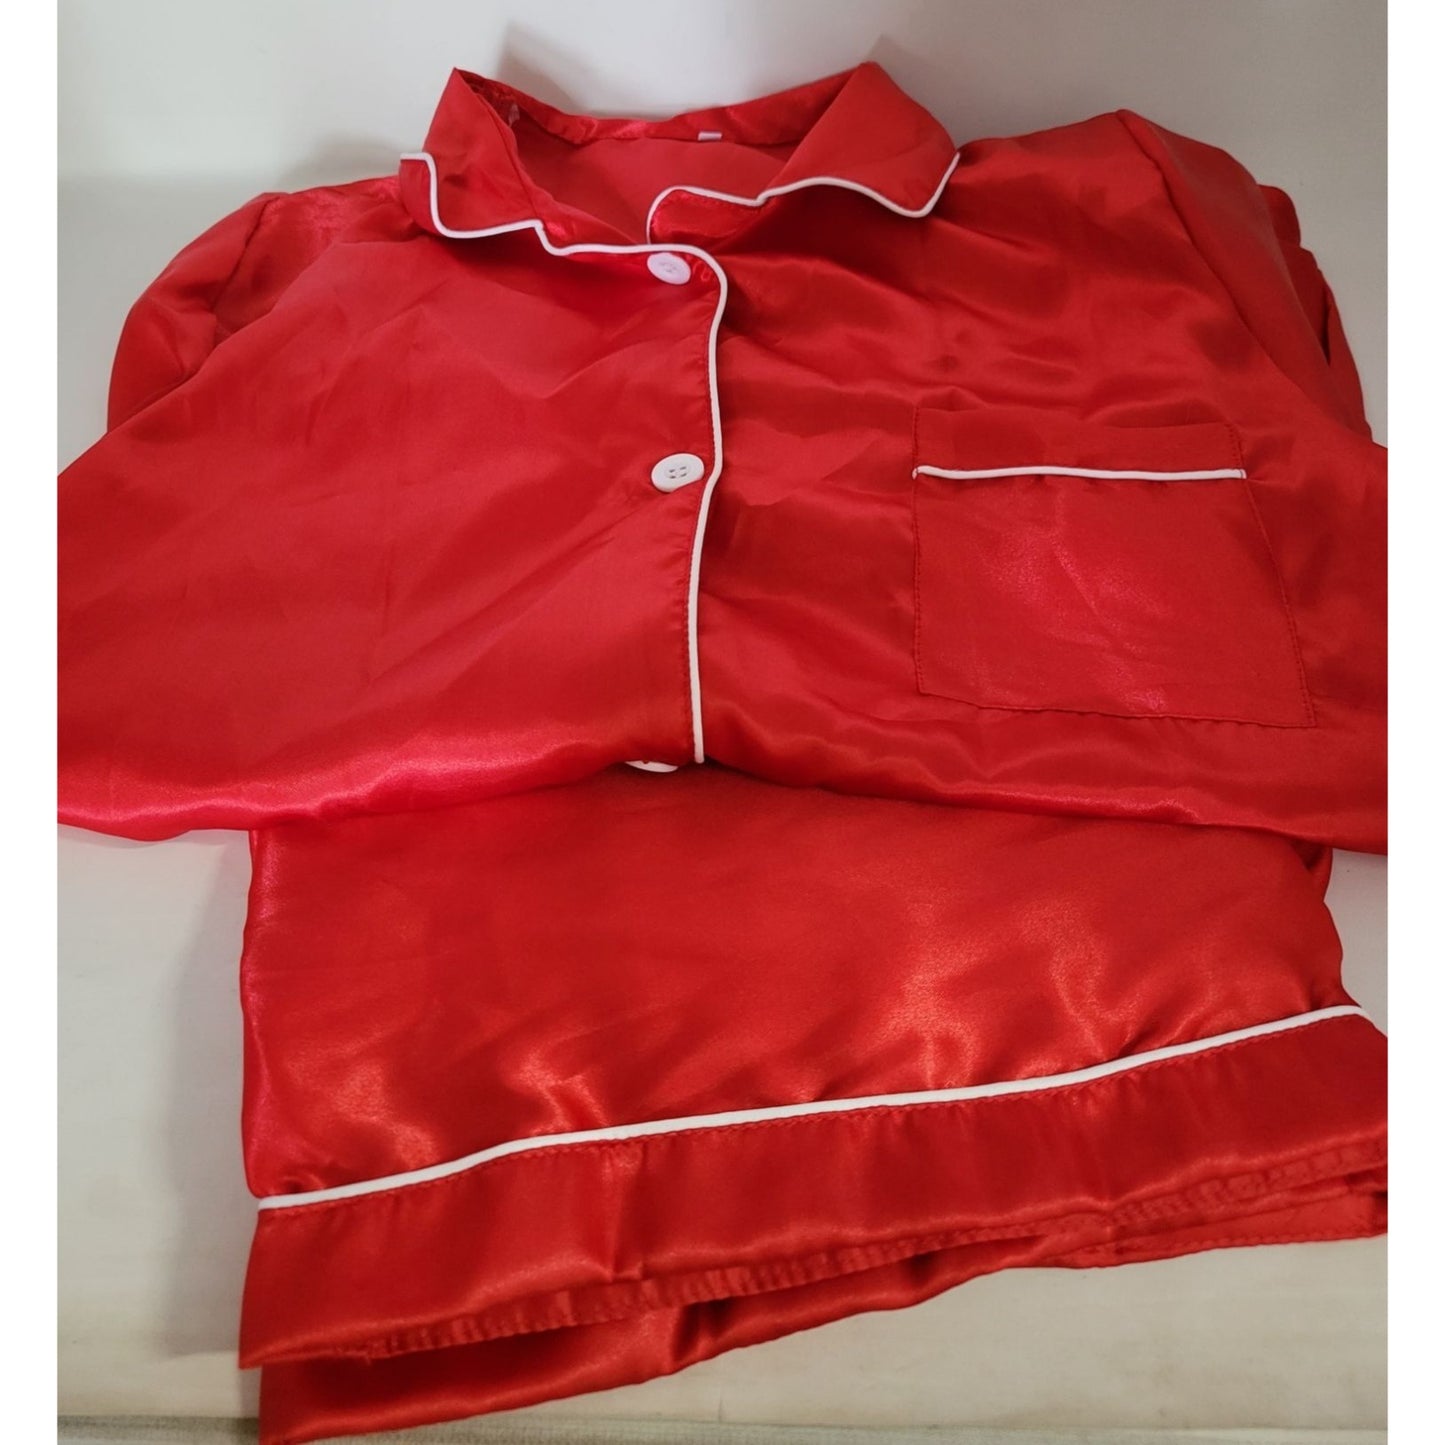 Red Satin Pajamas with White Piping and Buttons - Size XL Extra Large